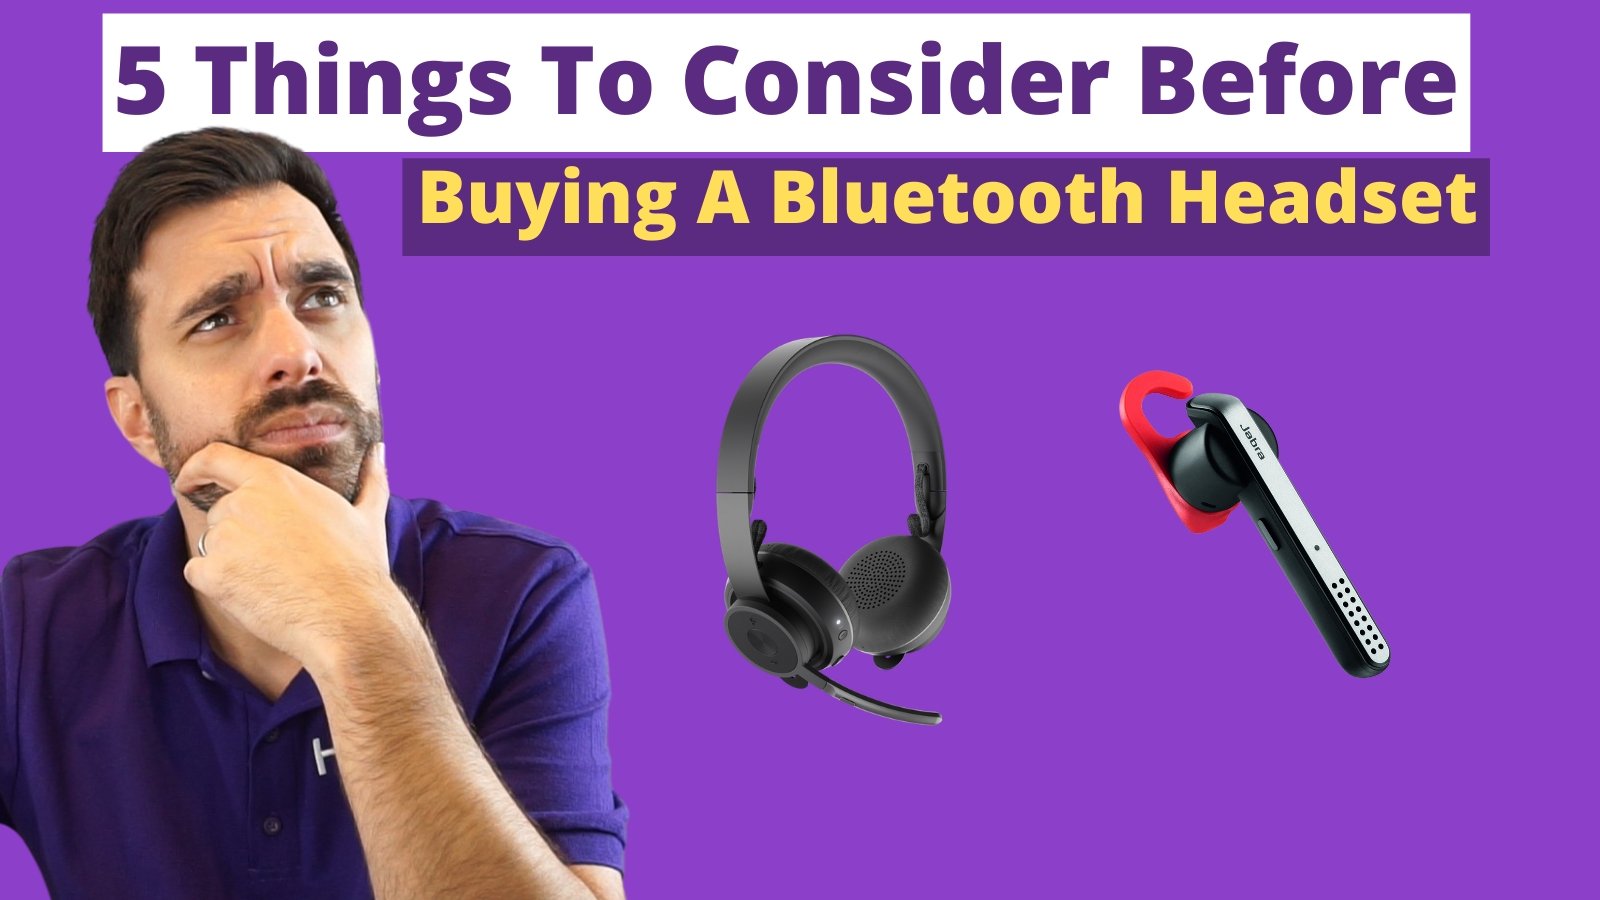 5 Things To Consider Before Buying A Bluetooth Headset